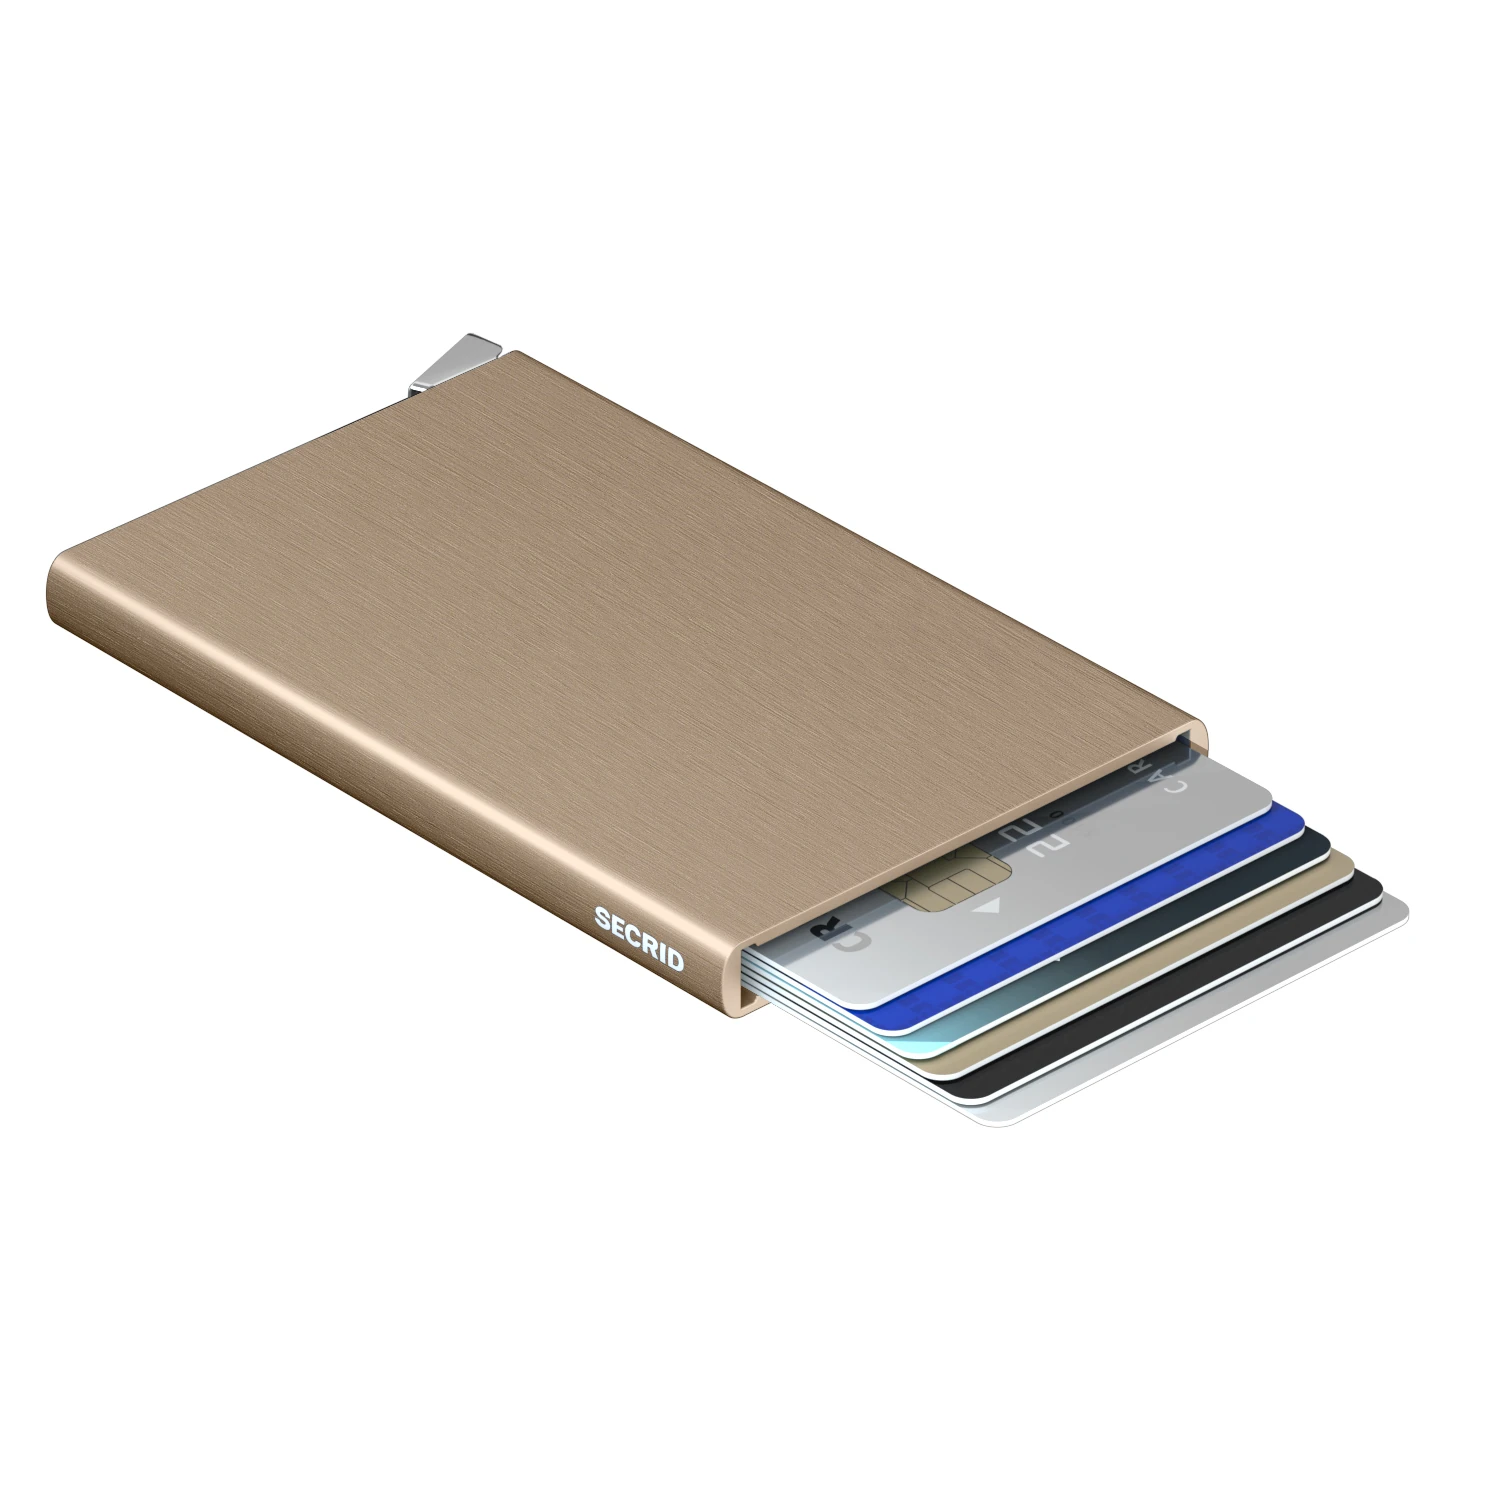 Secrid Cardprotector - Frost Sand